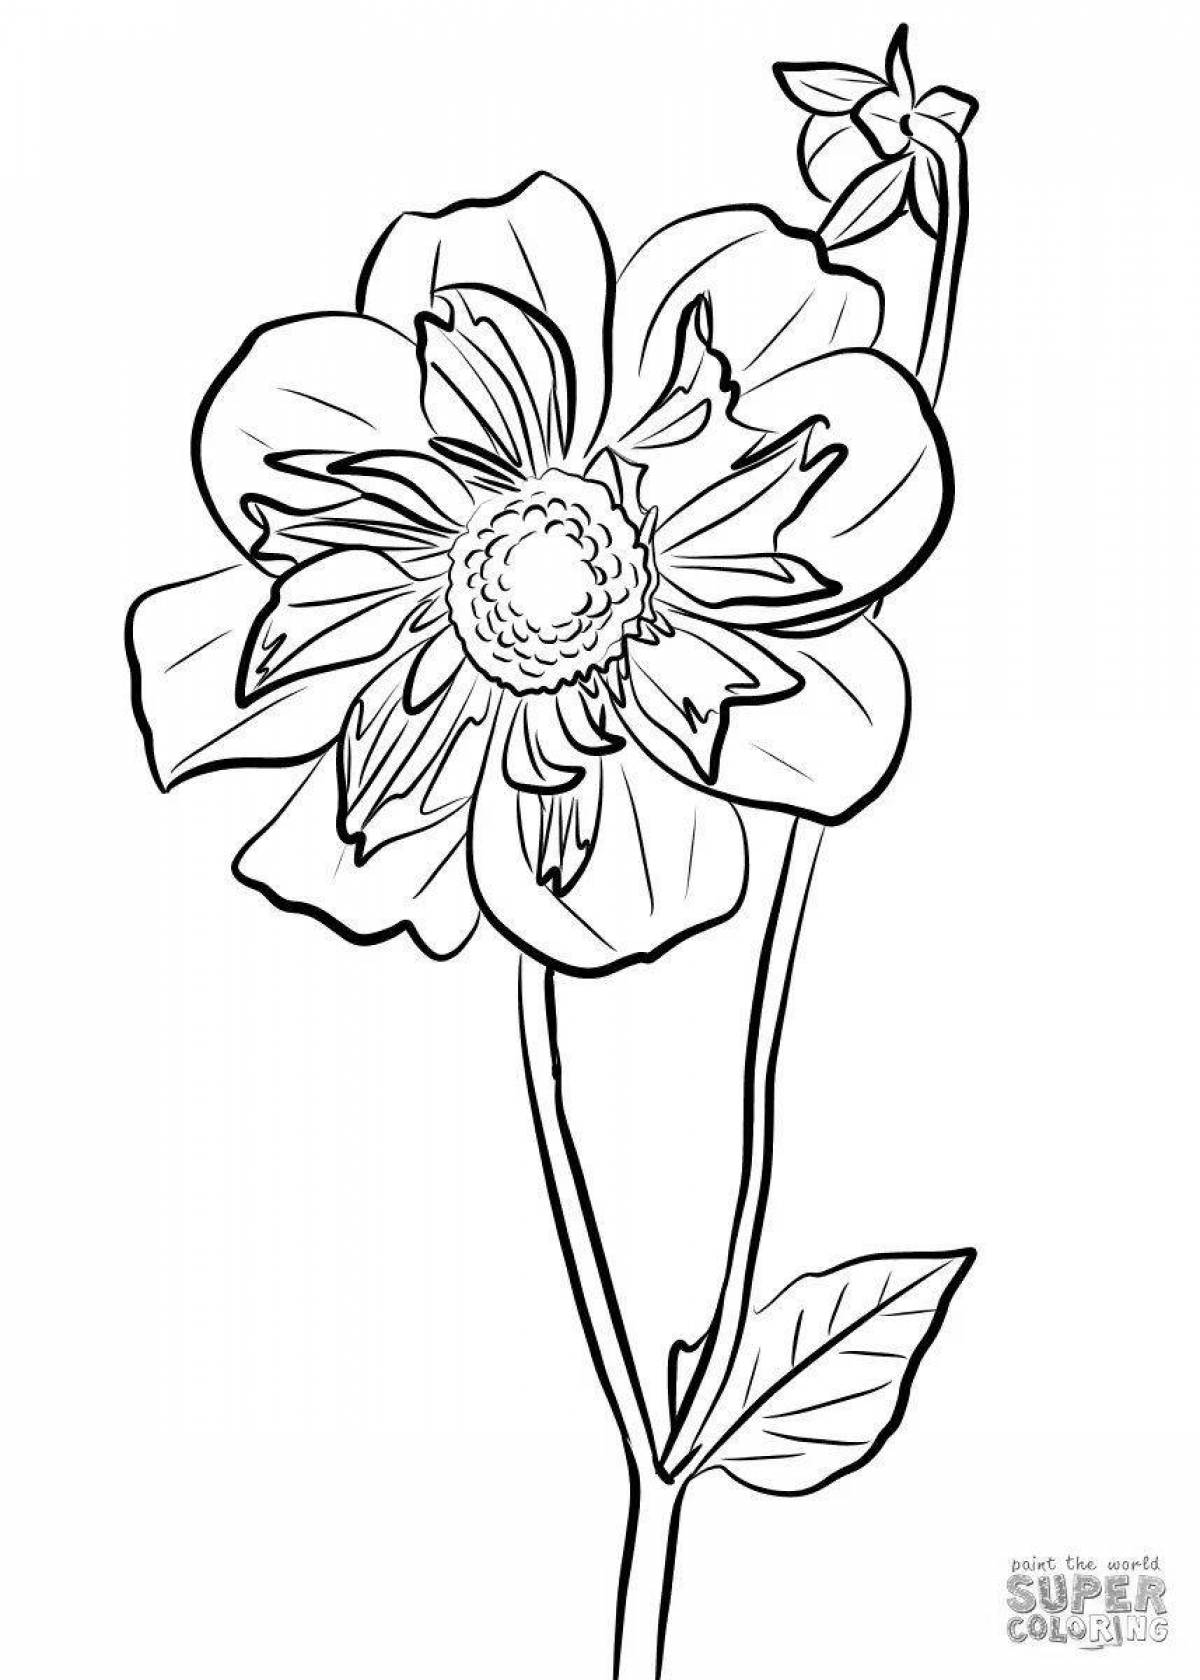 Coloring page cheerful dahlia